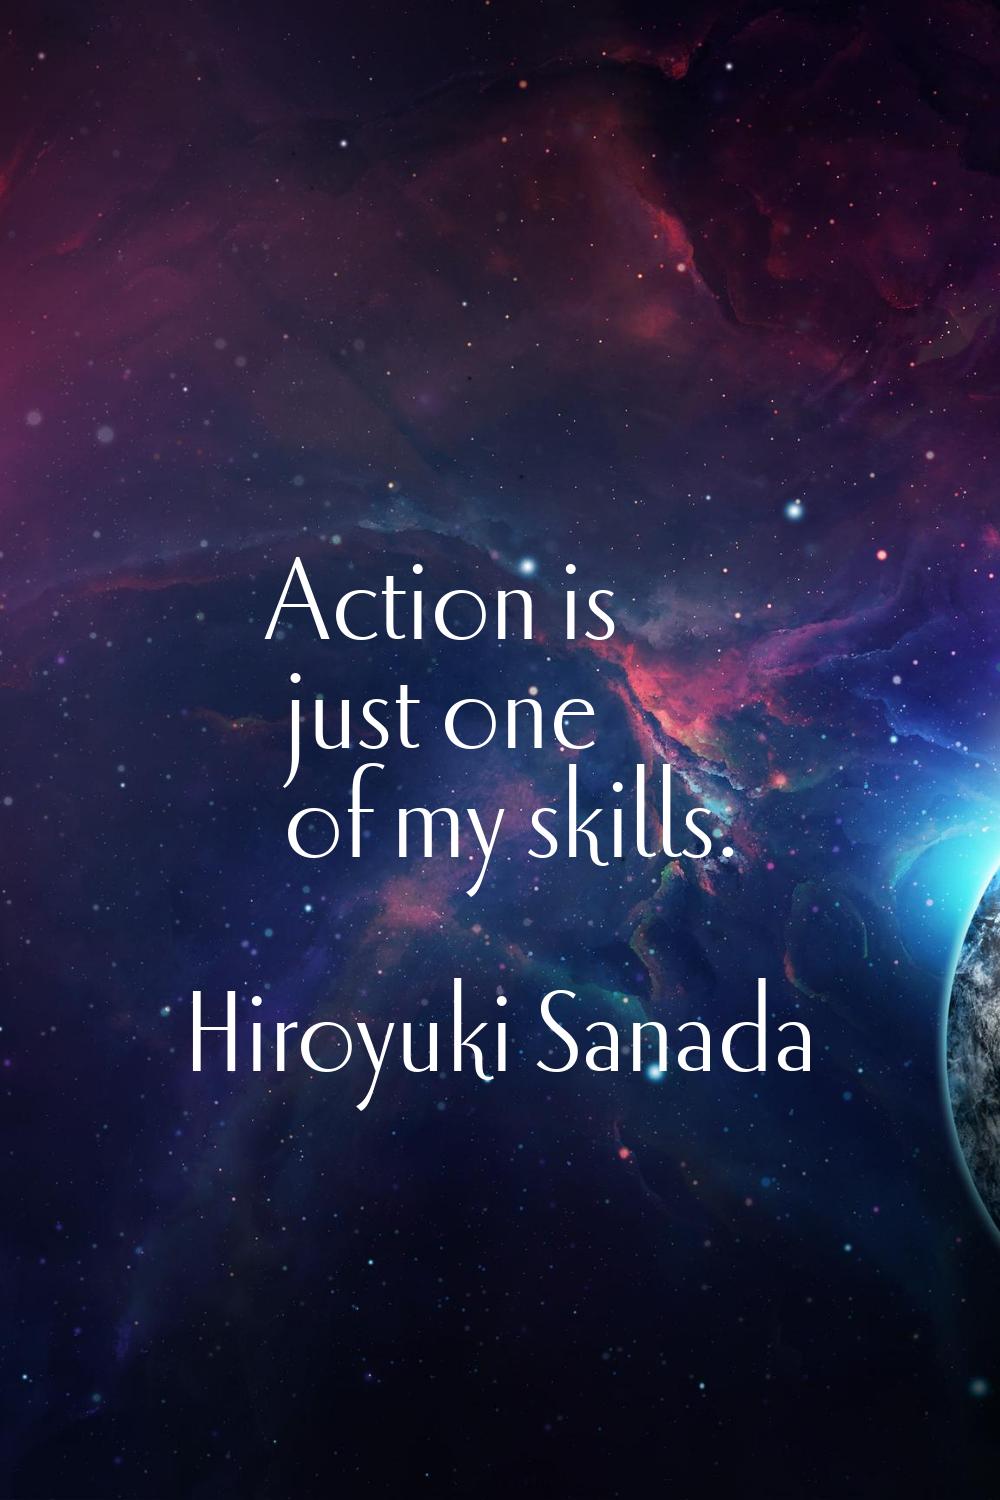 Action is just one of my skills.